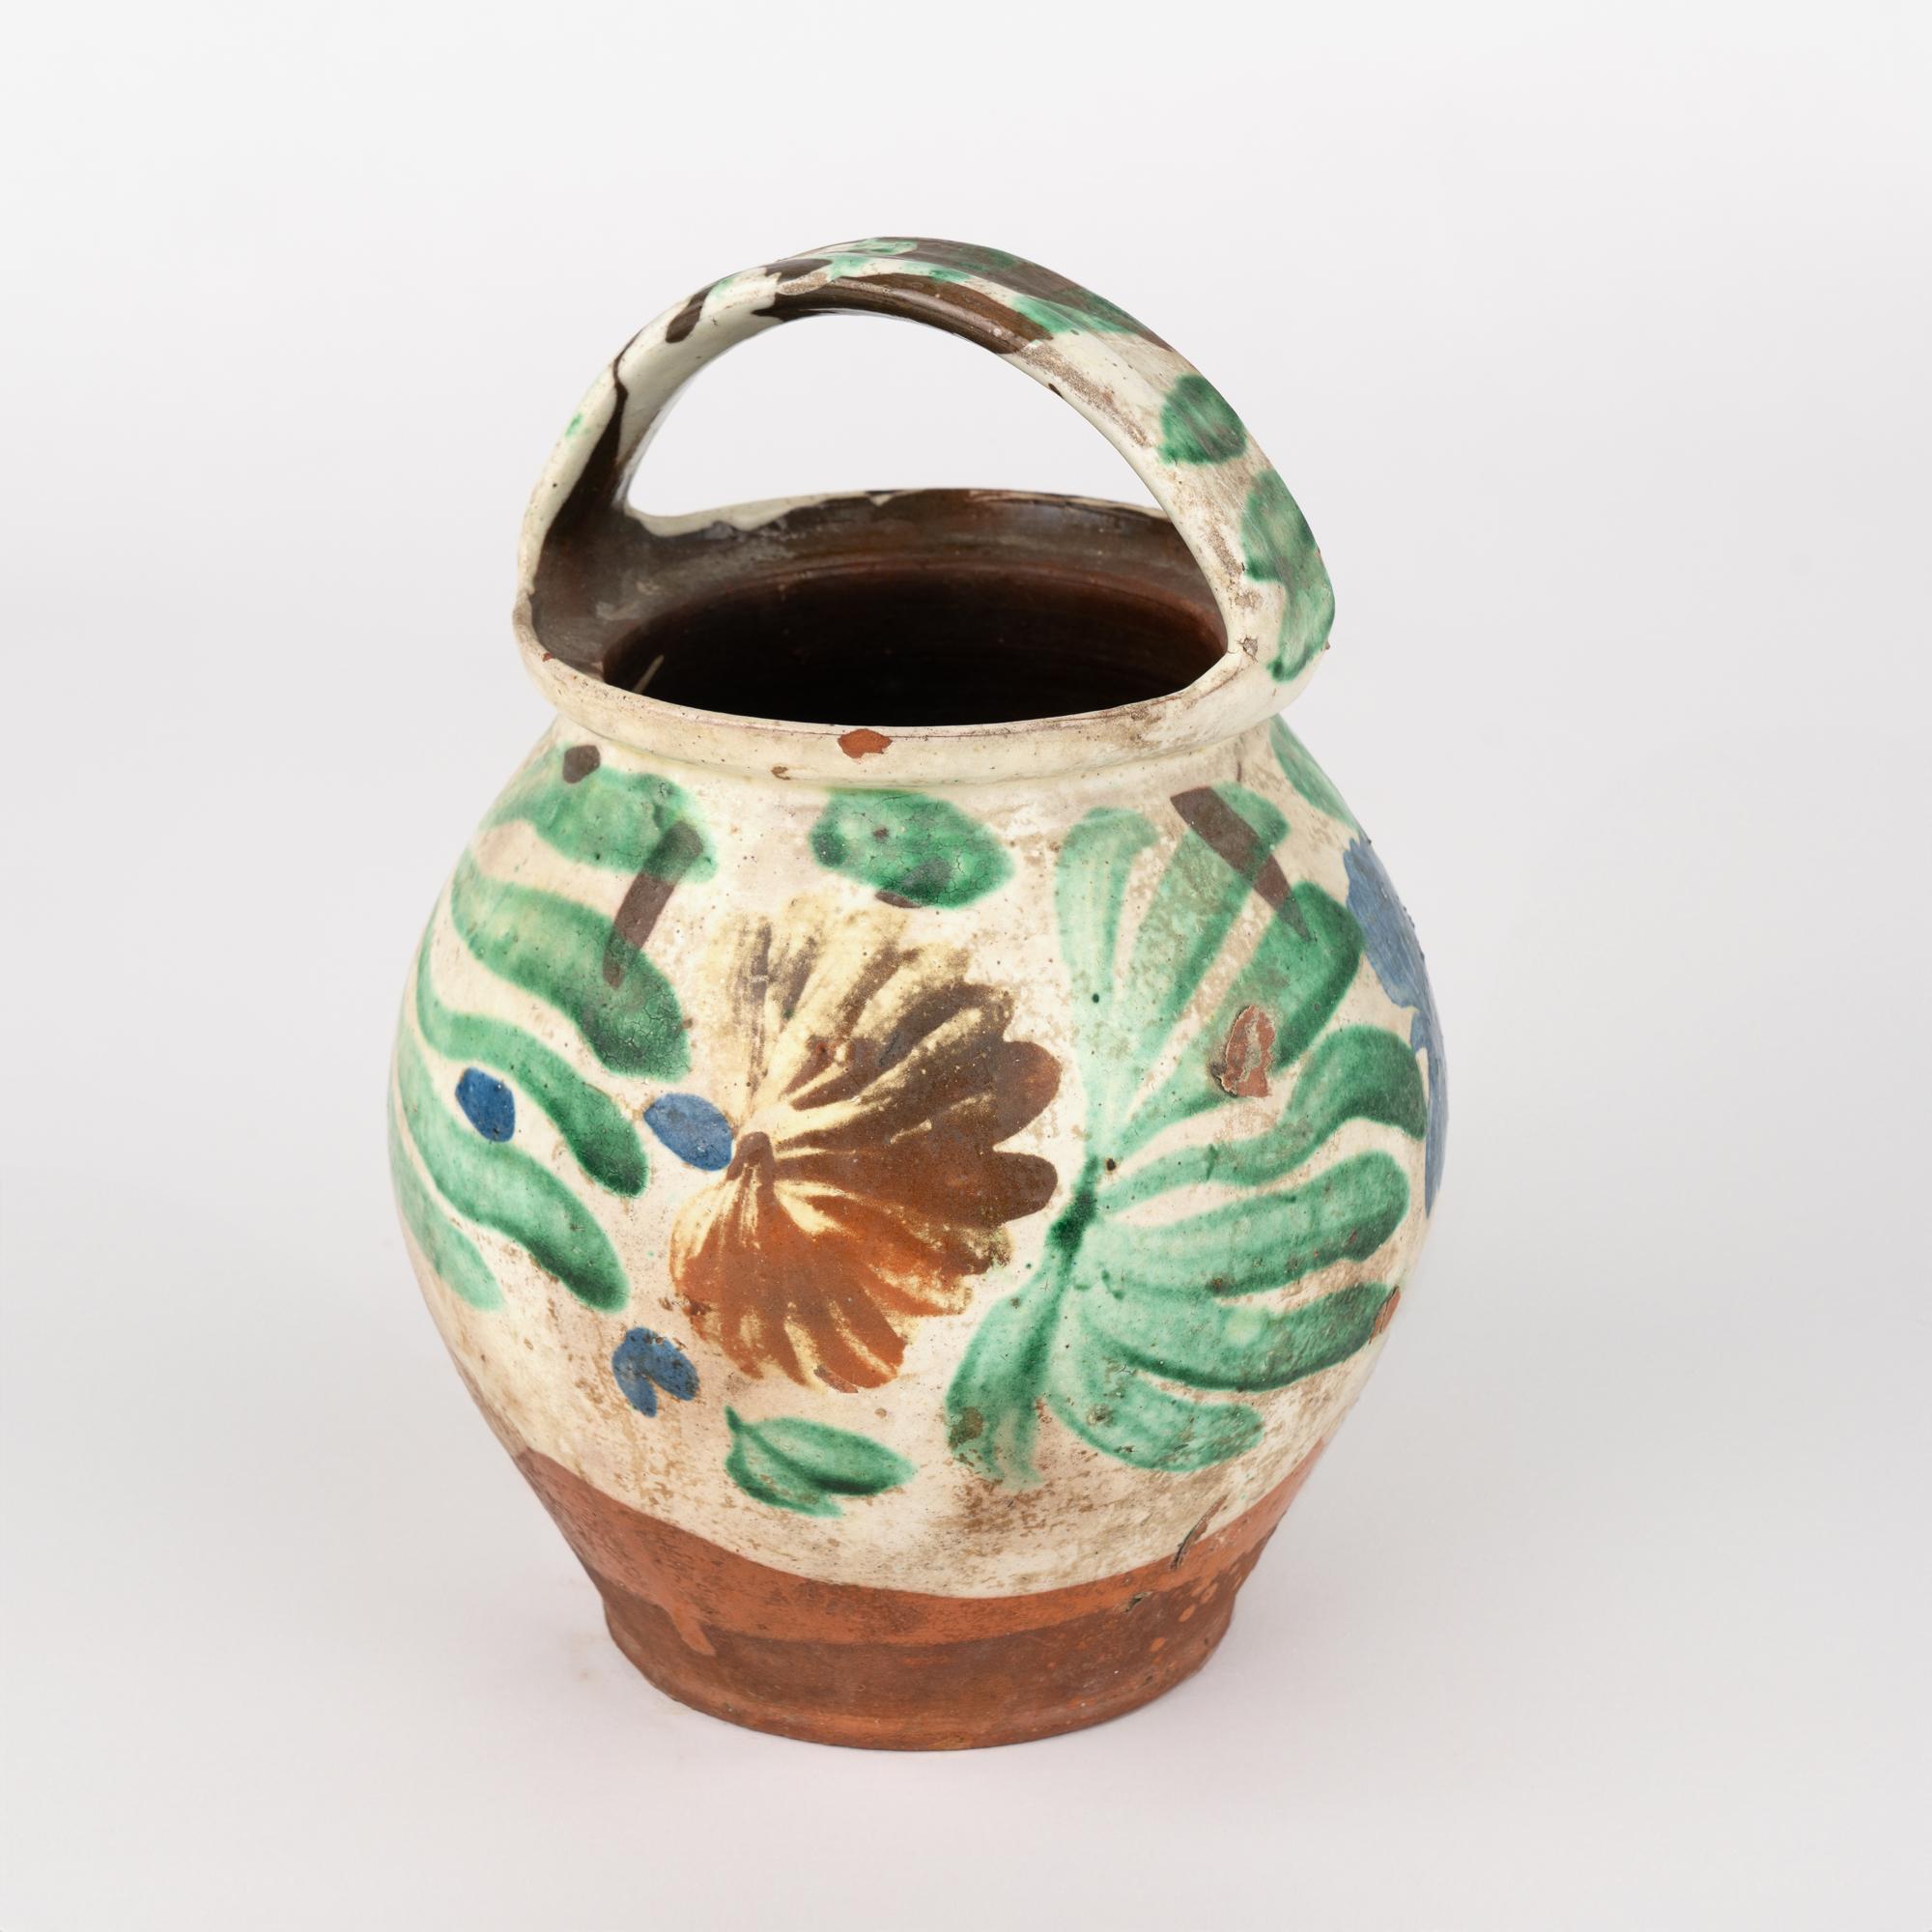 Original hand painted earthenware pottery with handle.
Sold in original vintage used condition. Any chips, cracks, distress to paint or pottery is reflective of age and use. Solid condition.

With over 37 years of experience selling European